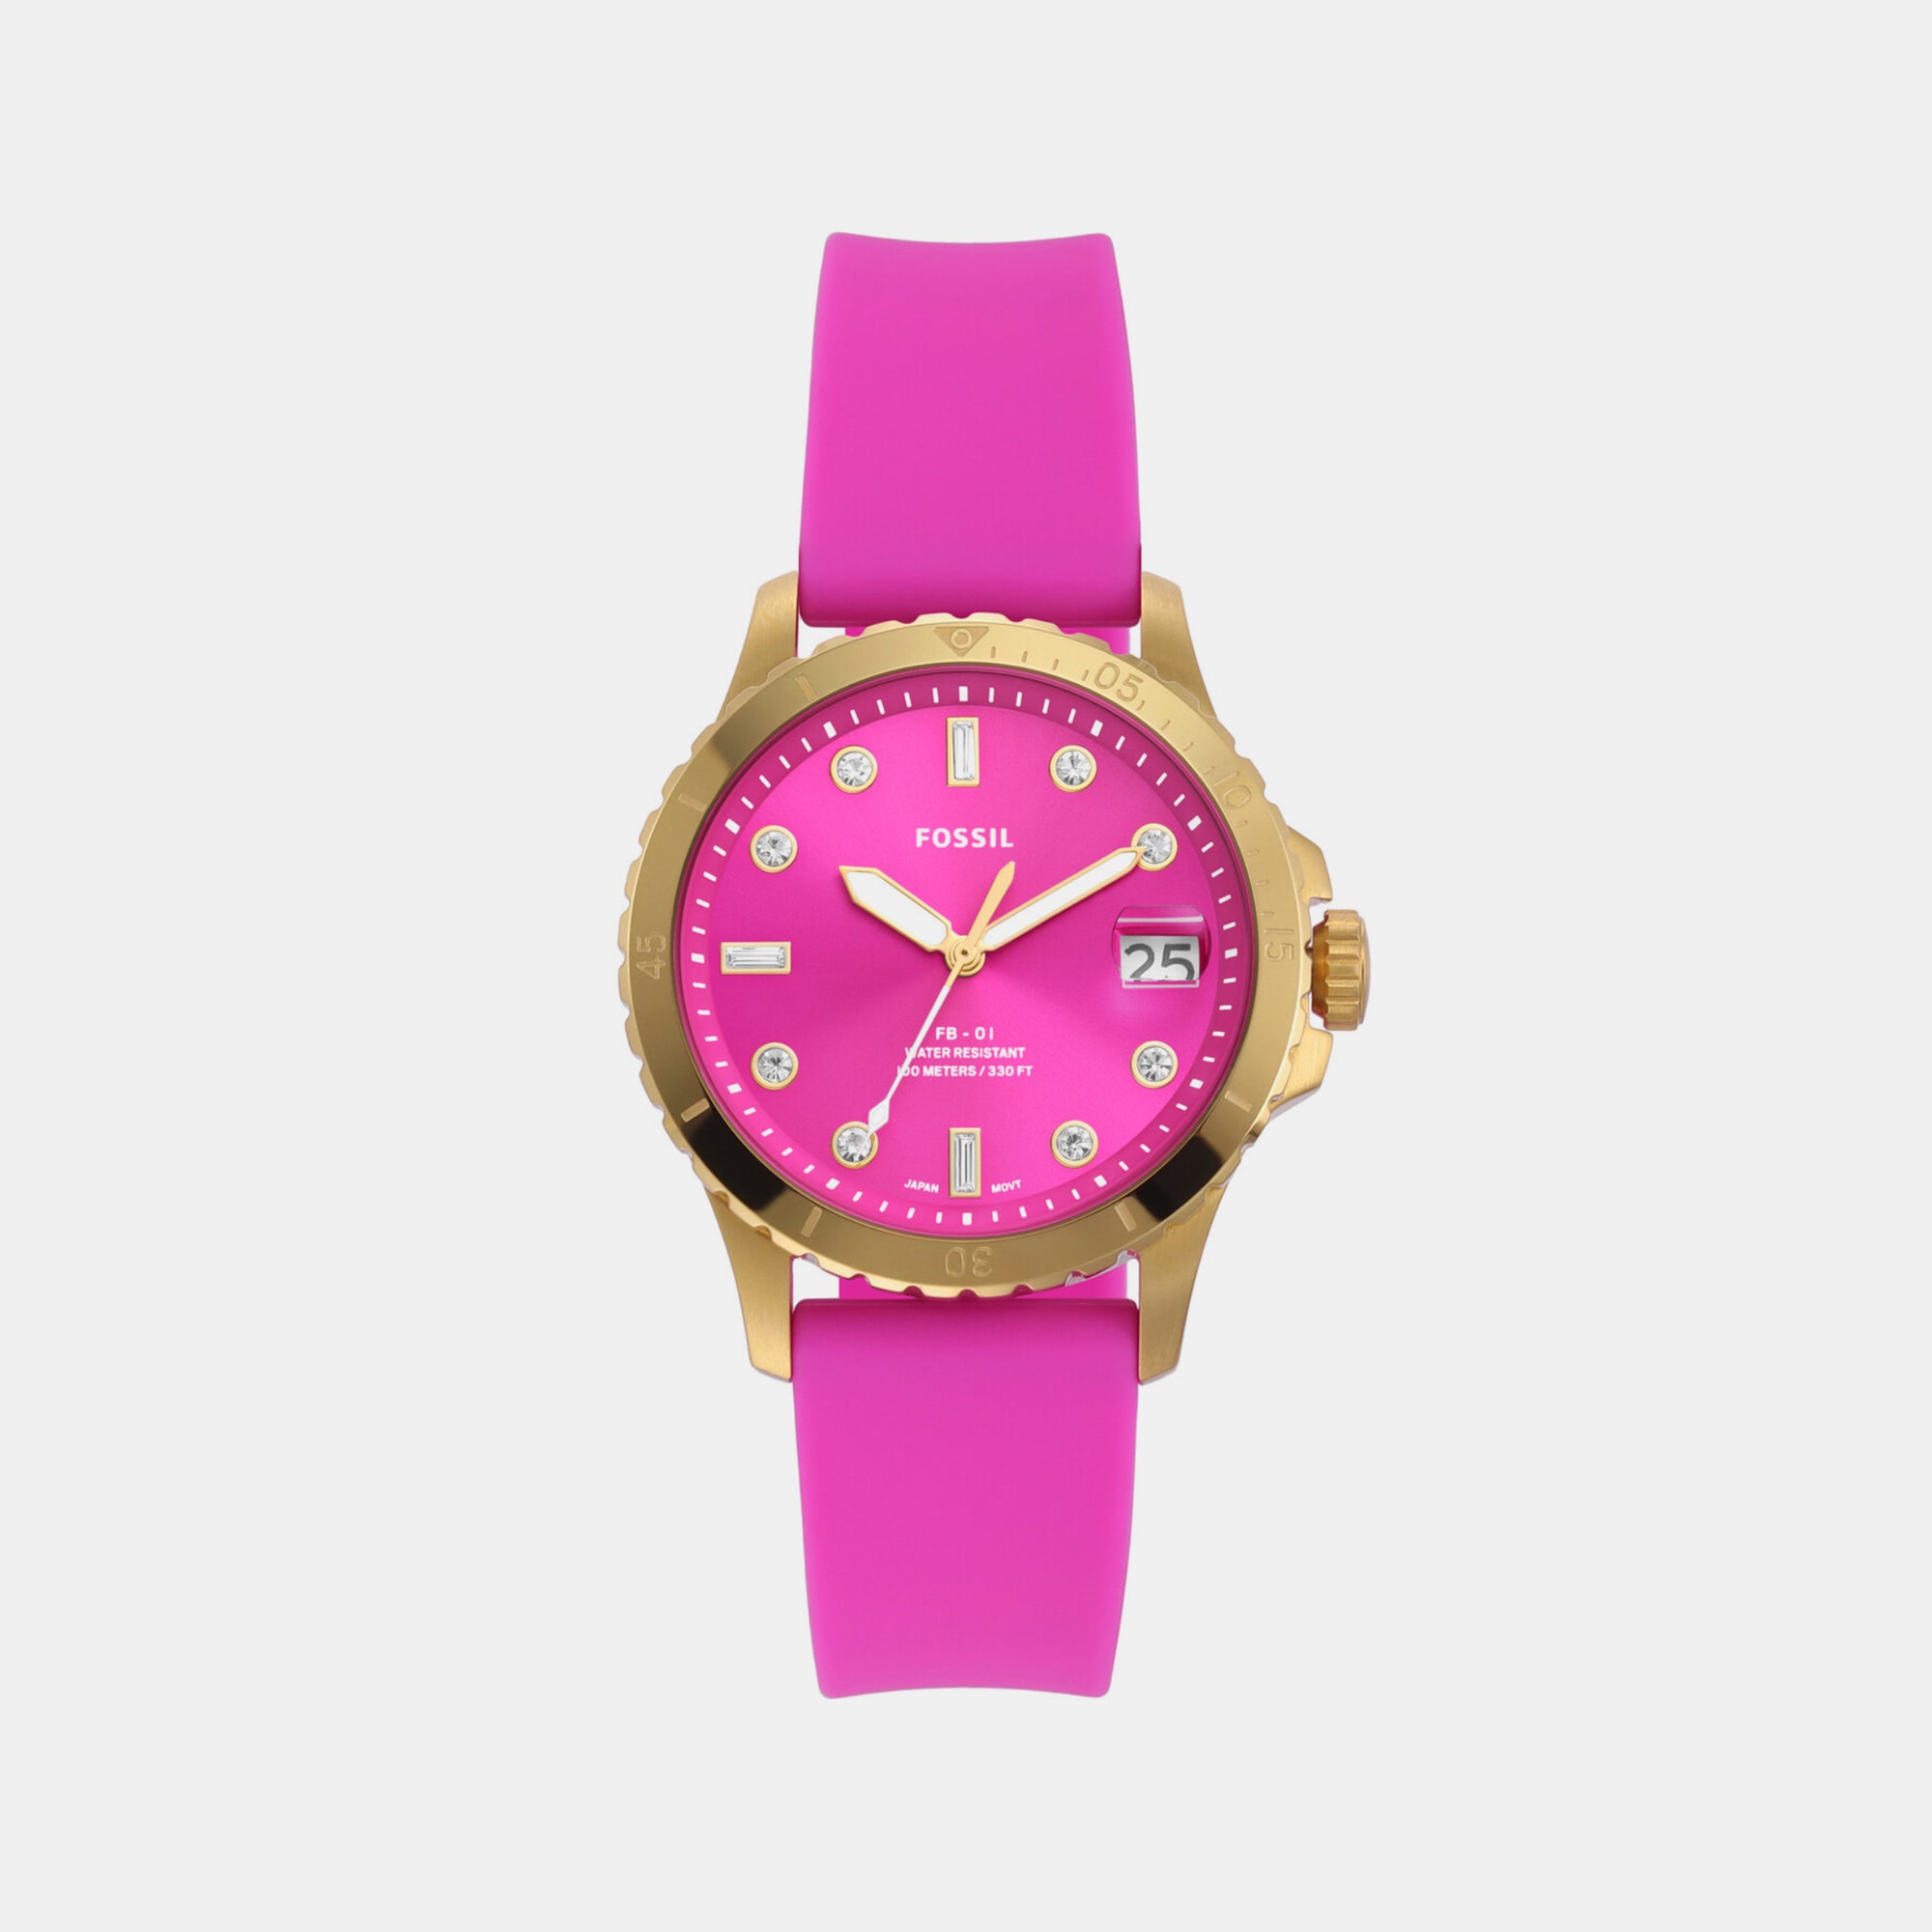 The Best Pink Watches